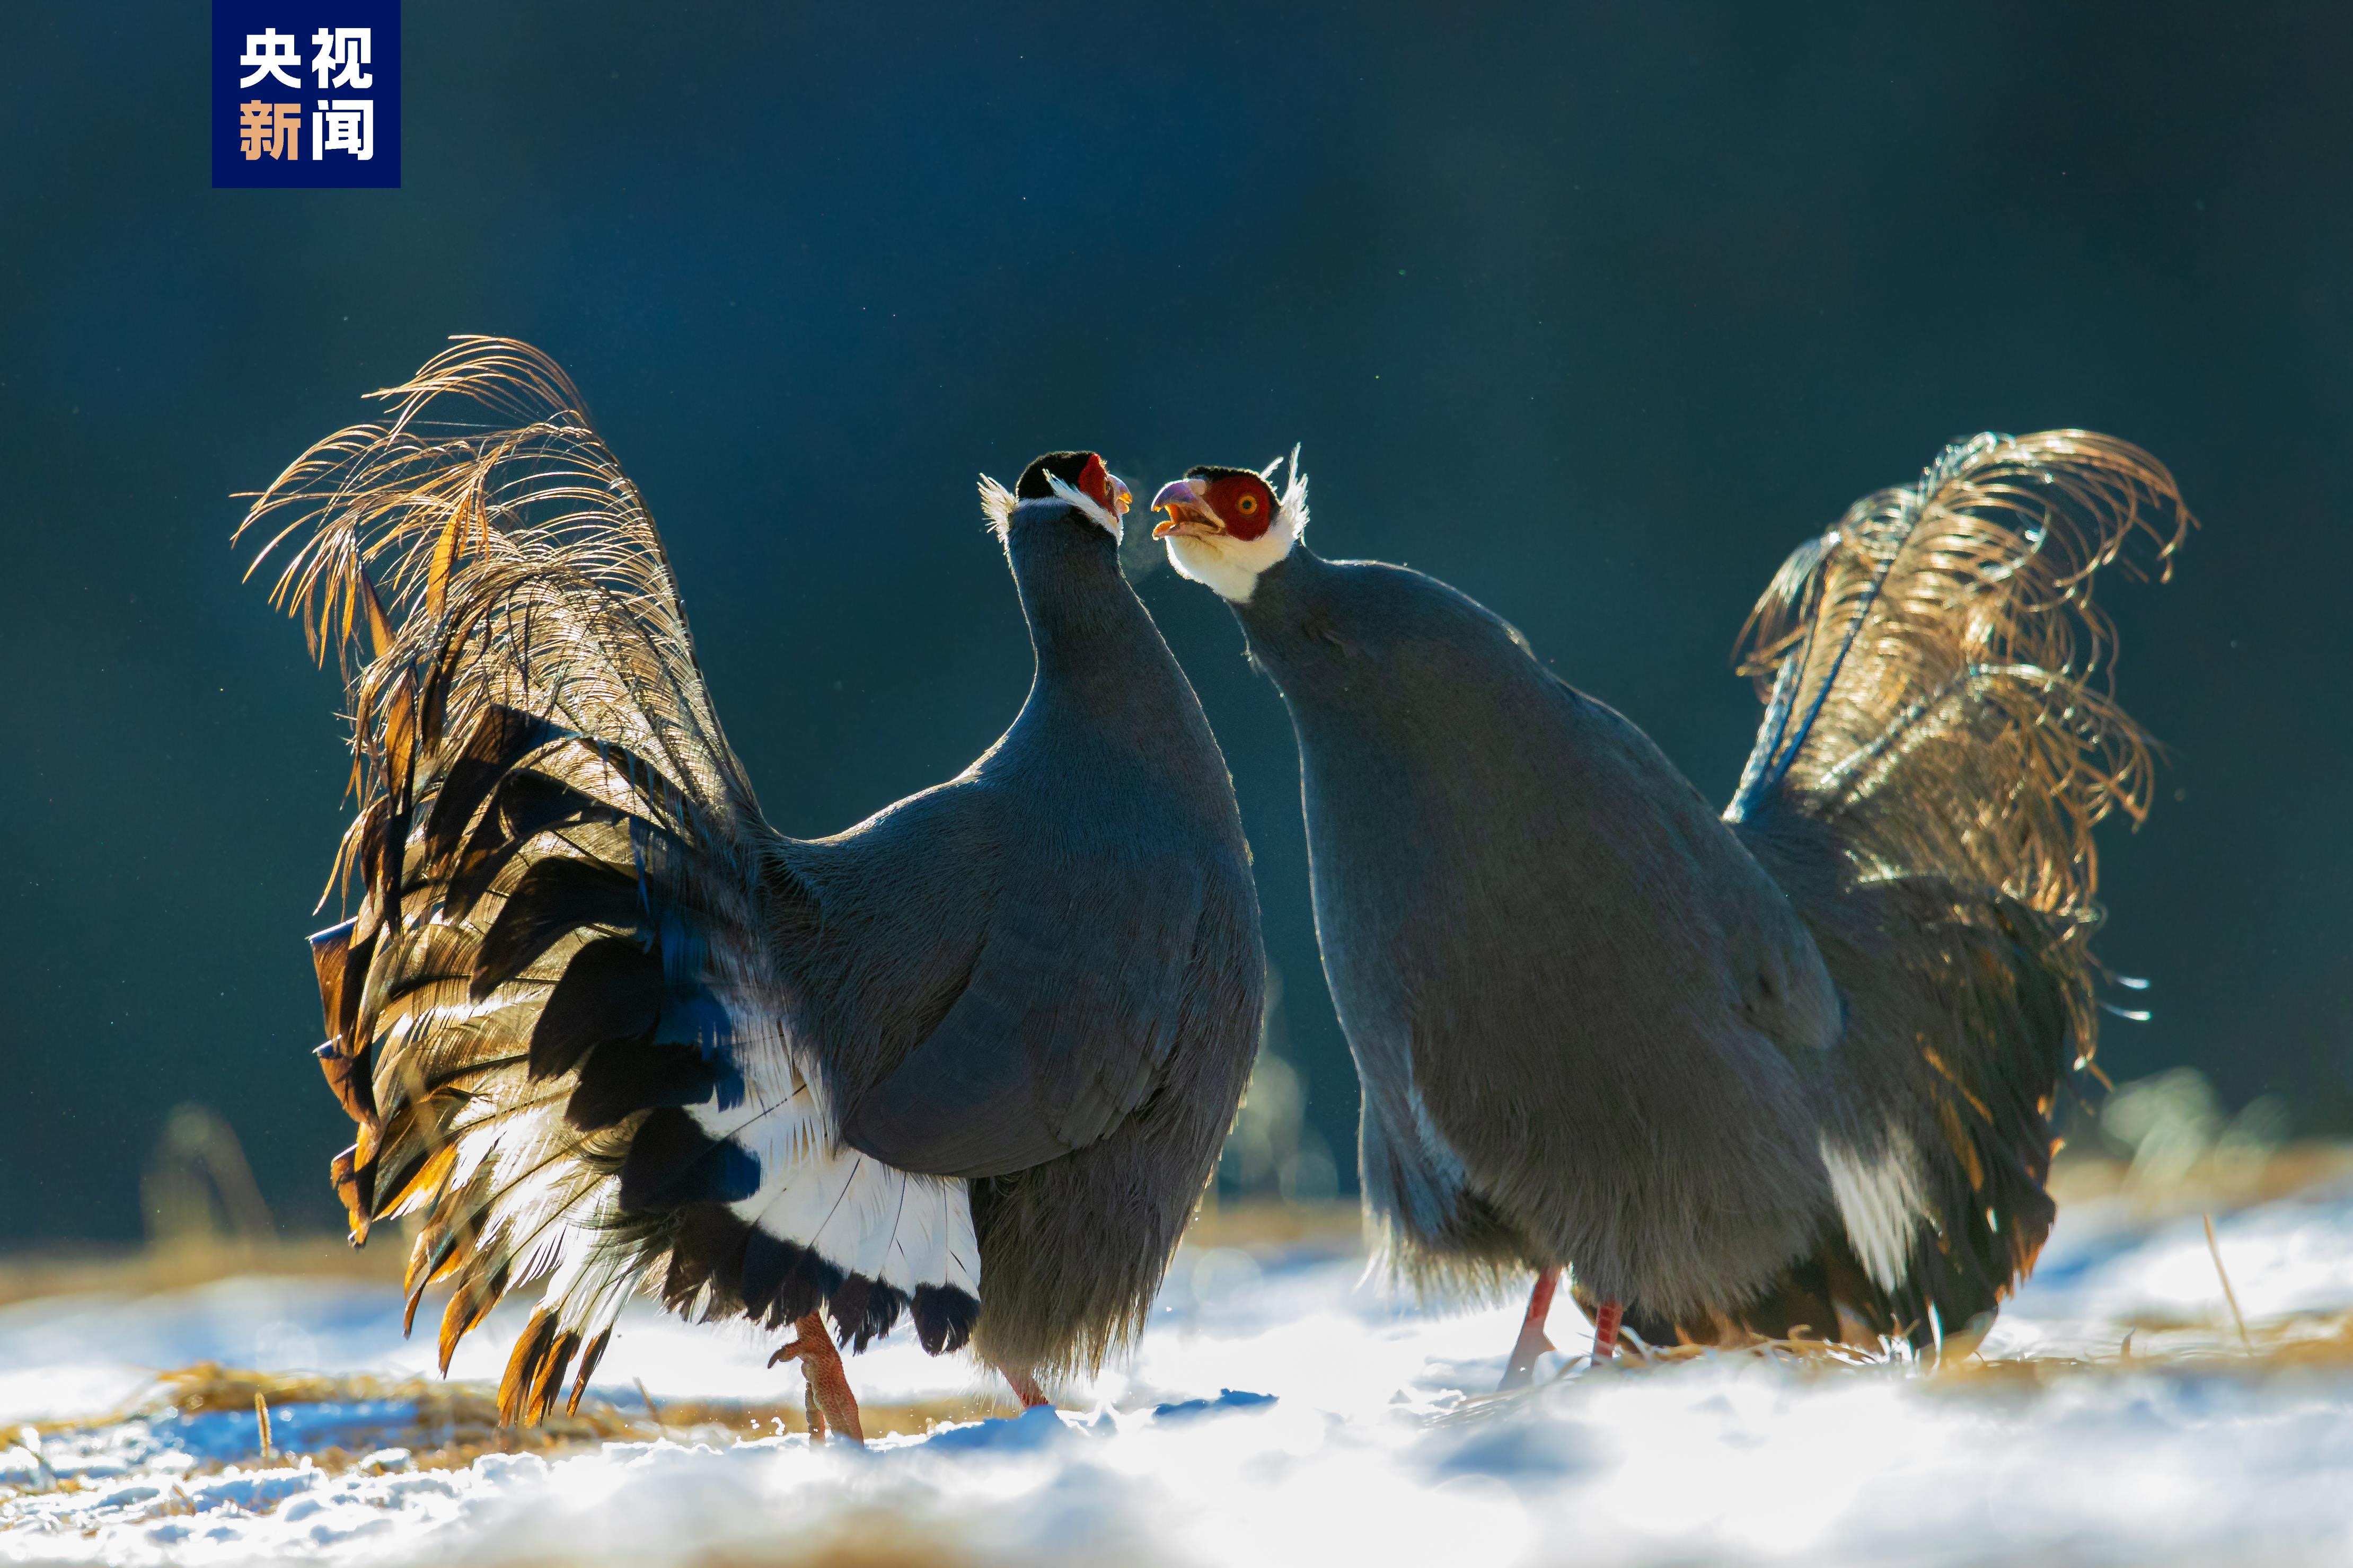 Blue-eared pheasant spotted on white snow in NW China